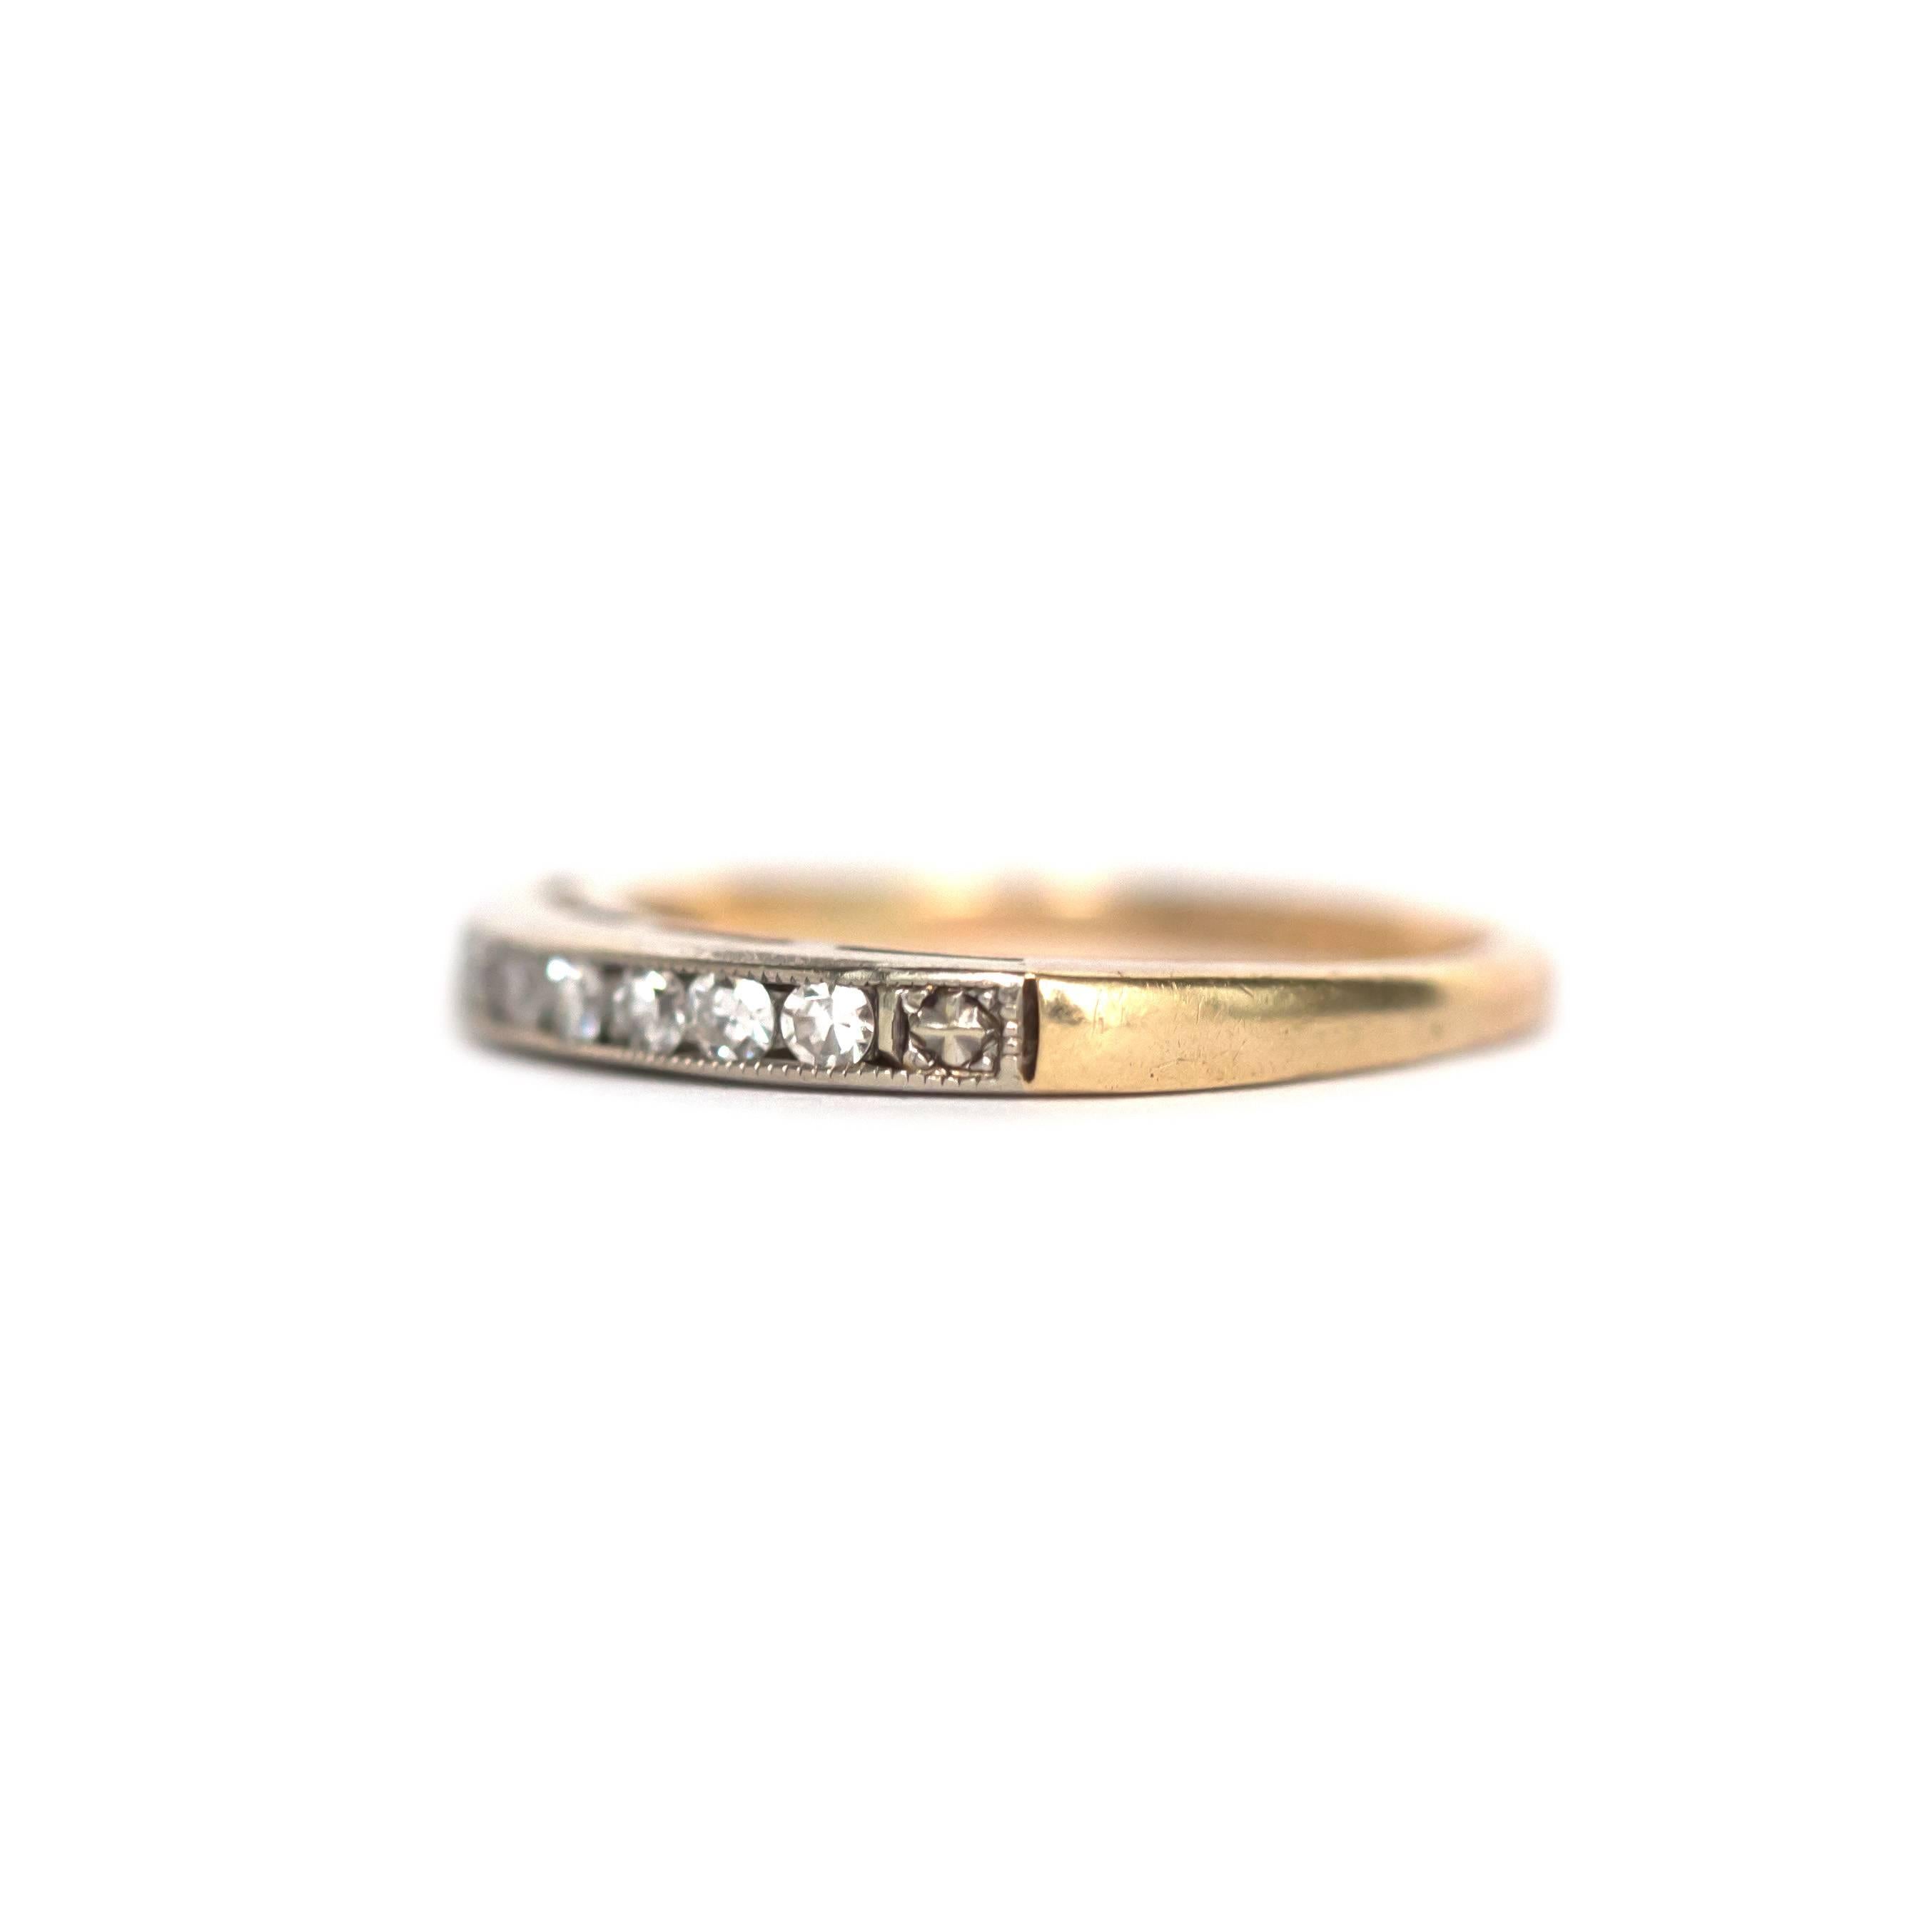 Item Details: 
Ring Size: 4.75
Metal Type: 14 Karat Yellow Gold, Platinum top
Weight: 1.9 grams

Side Stone Details: 
Shape: Antique Single Cut
Total Carat Weight: .20 carat, total weight
Color: F
Clarity: VS

Finger to Top of Stone Measurement: